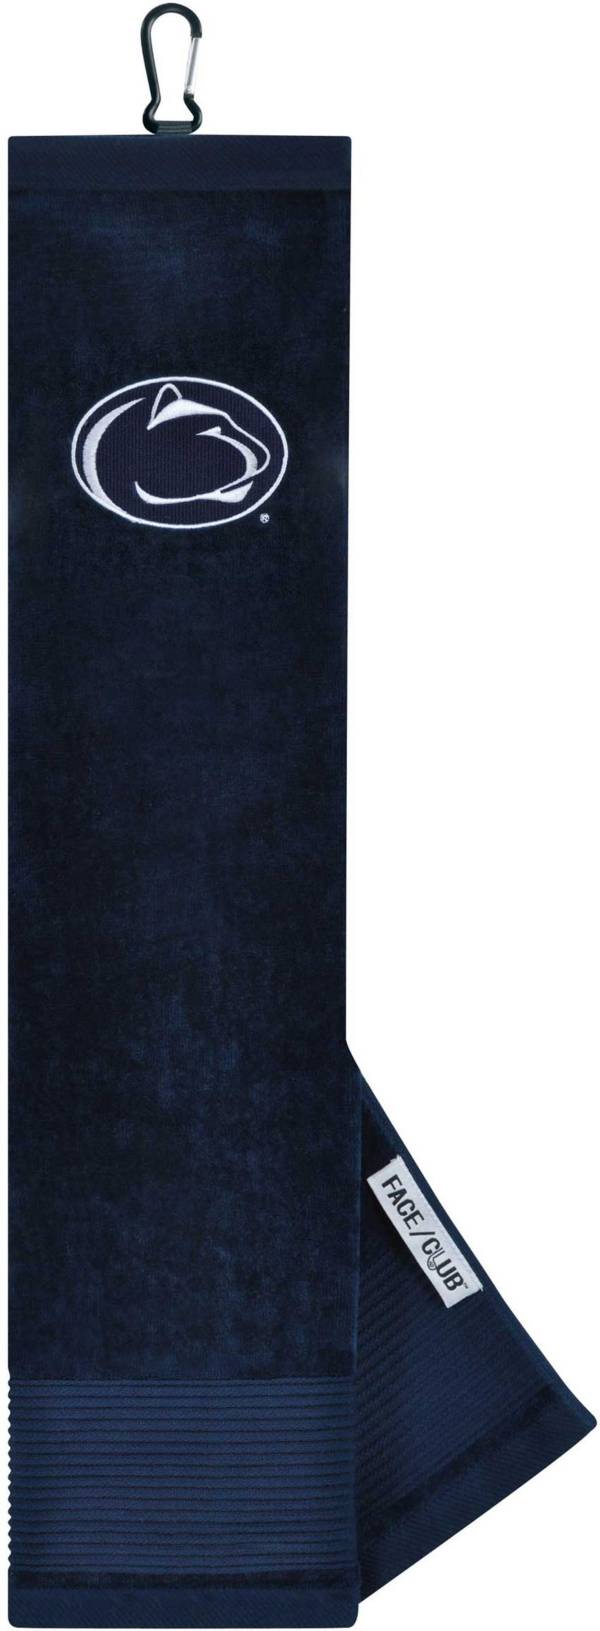 Team Effort Penn State Nittany Lions Embroidered Face/Club Tri-Fold Towel product image